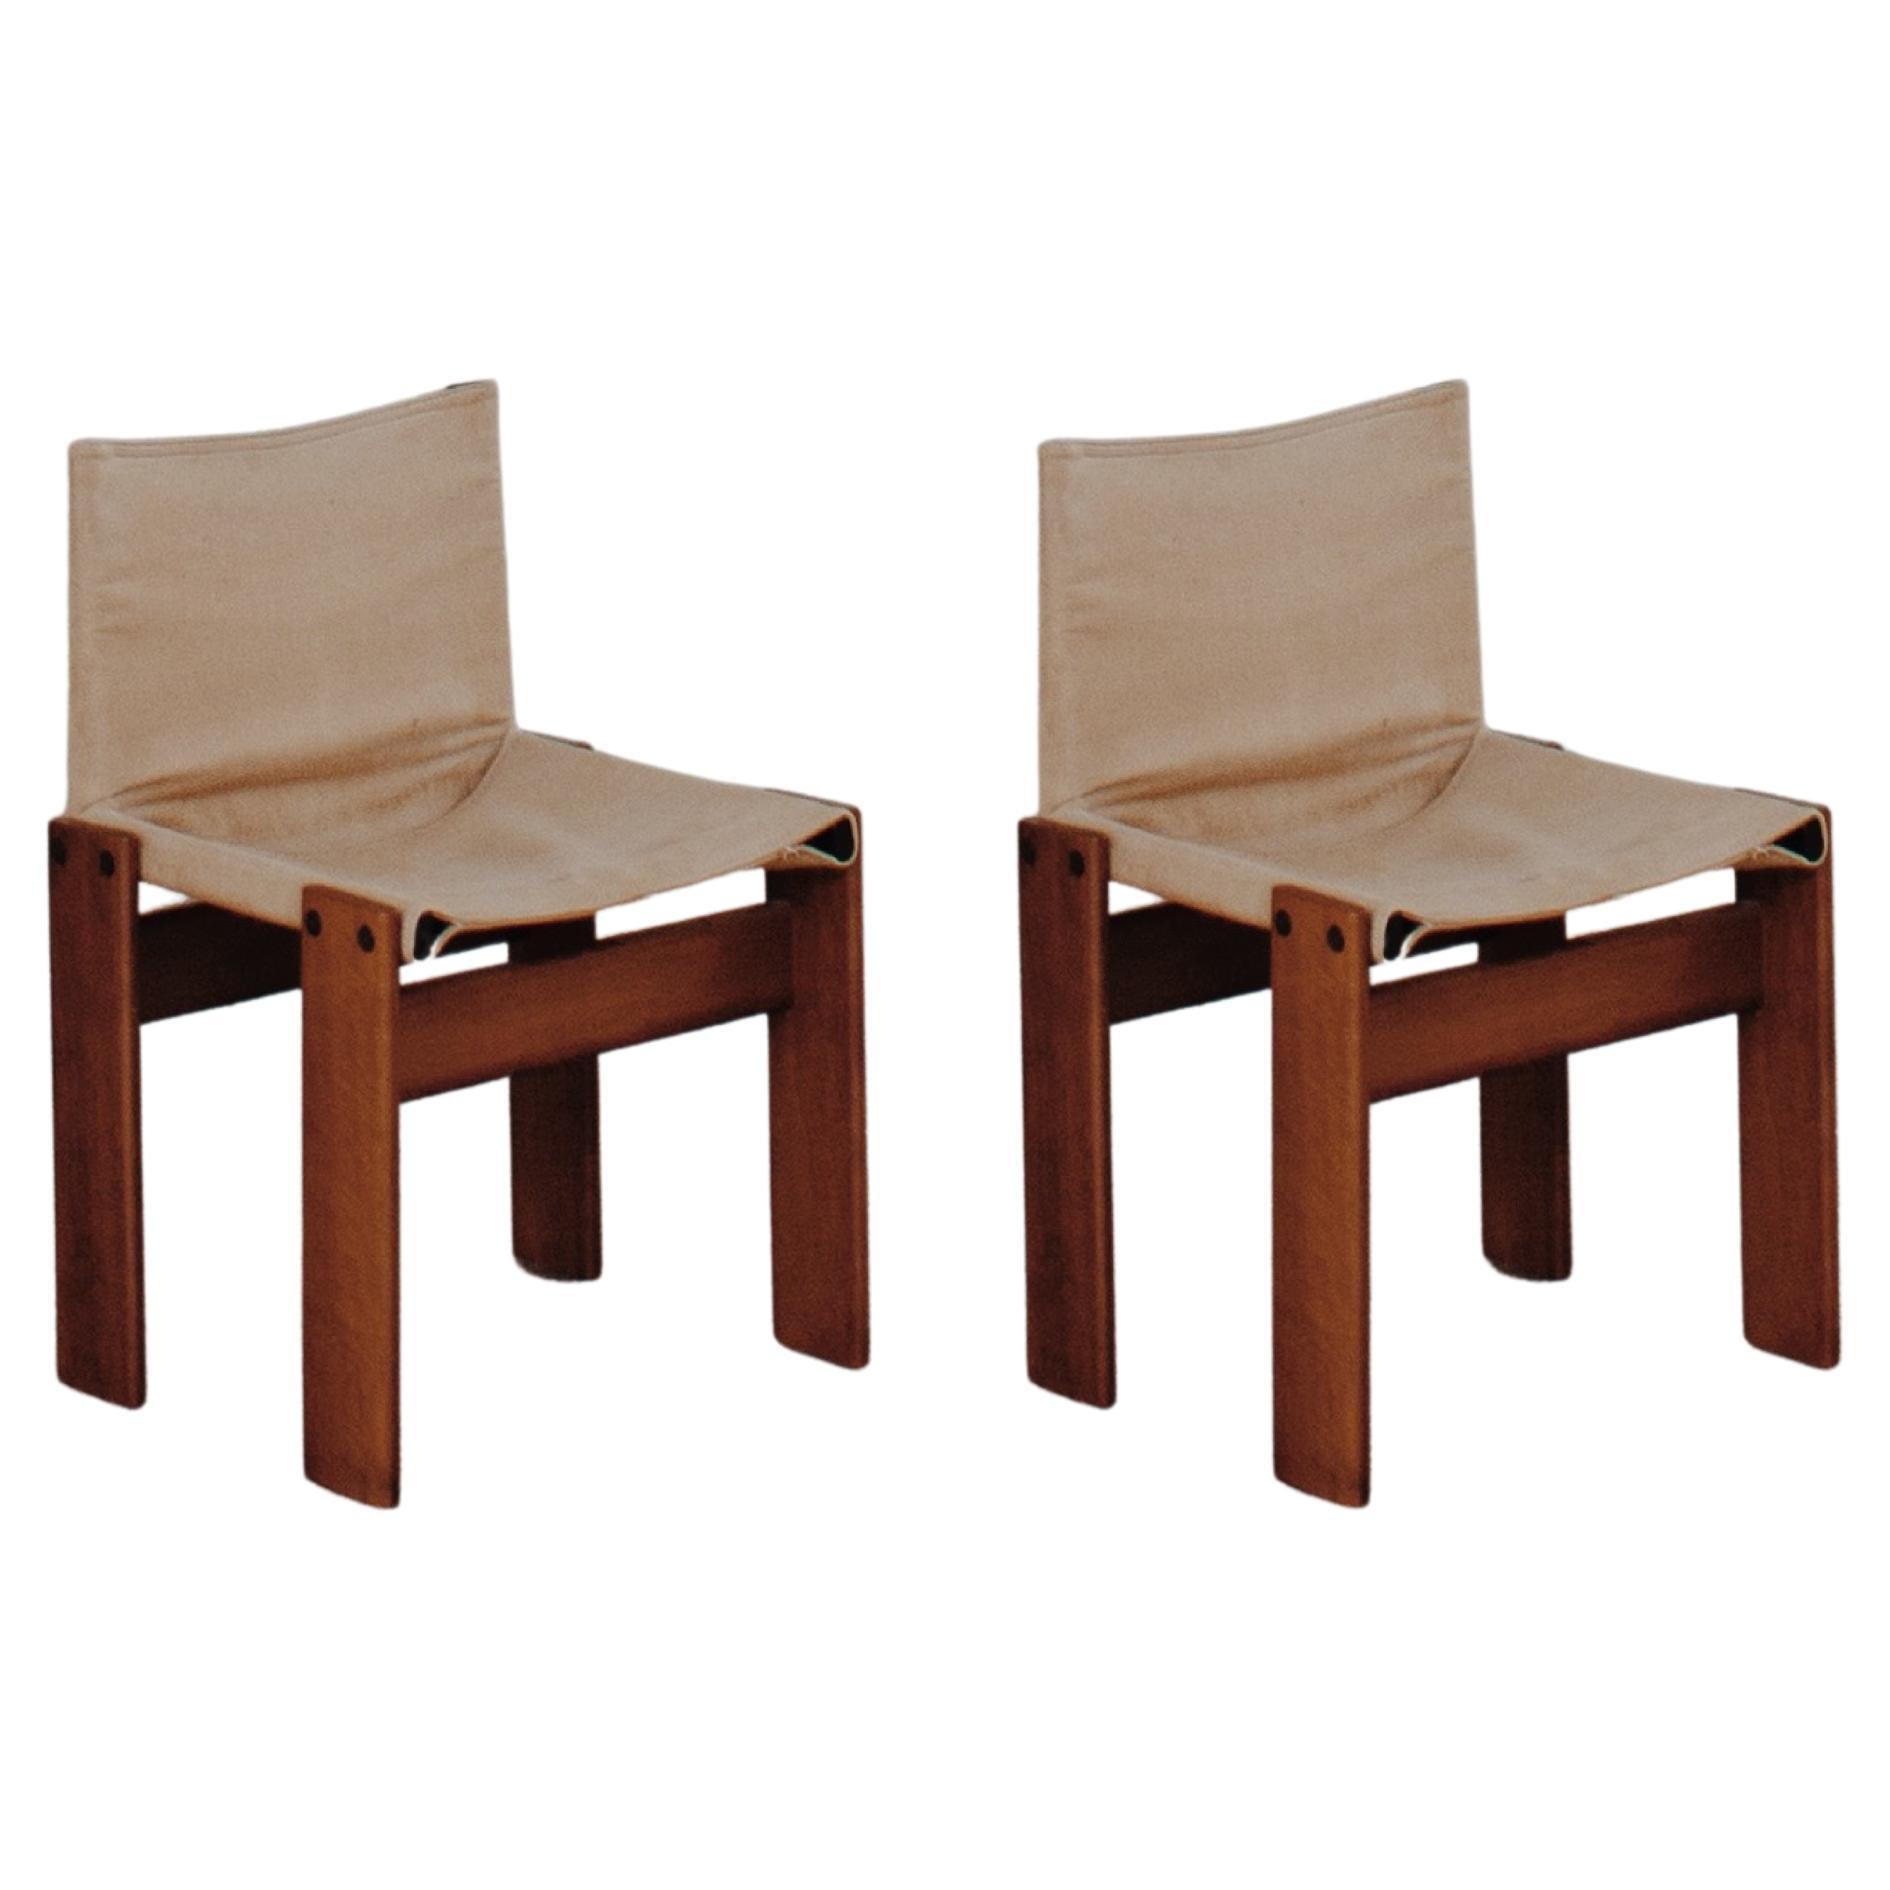 Afra & Tobia Scarpa "Monk" Chairs for Molteni, 1974, Set of 2